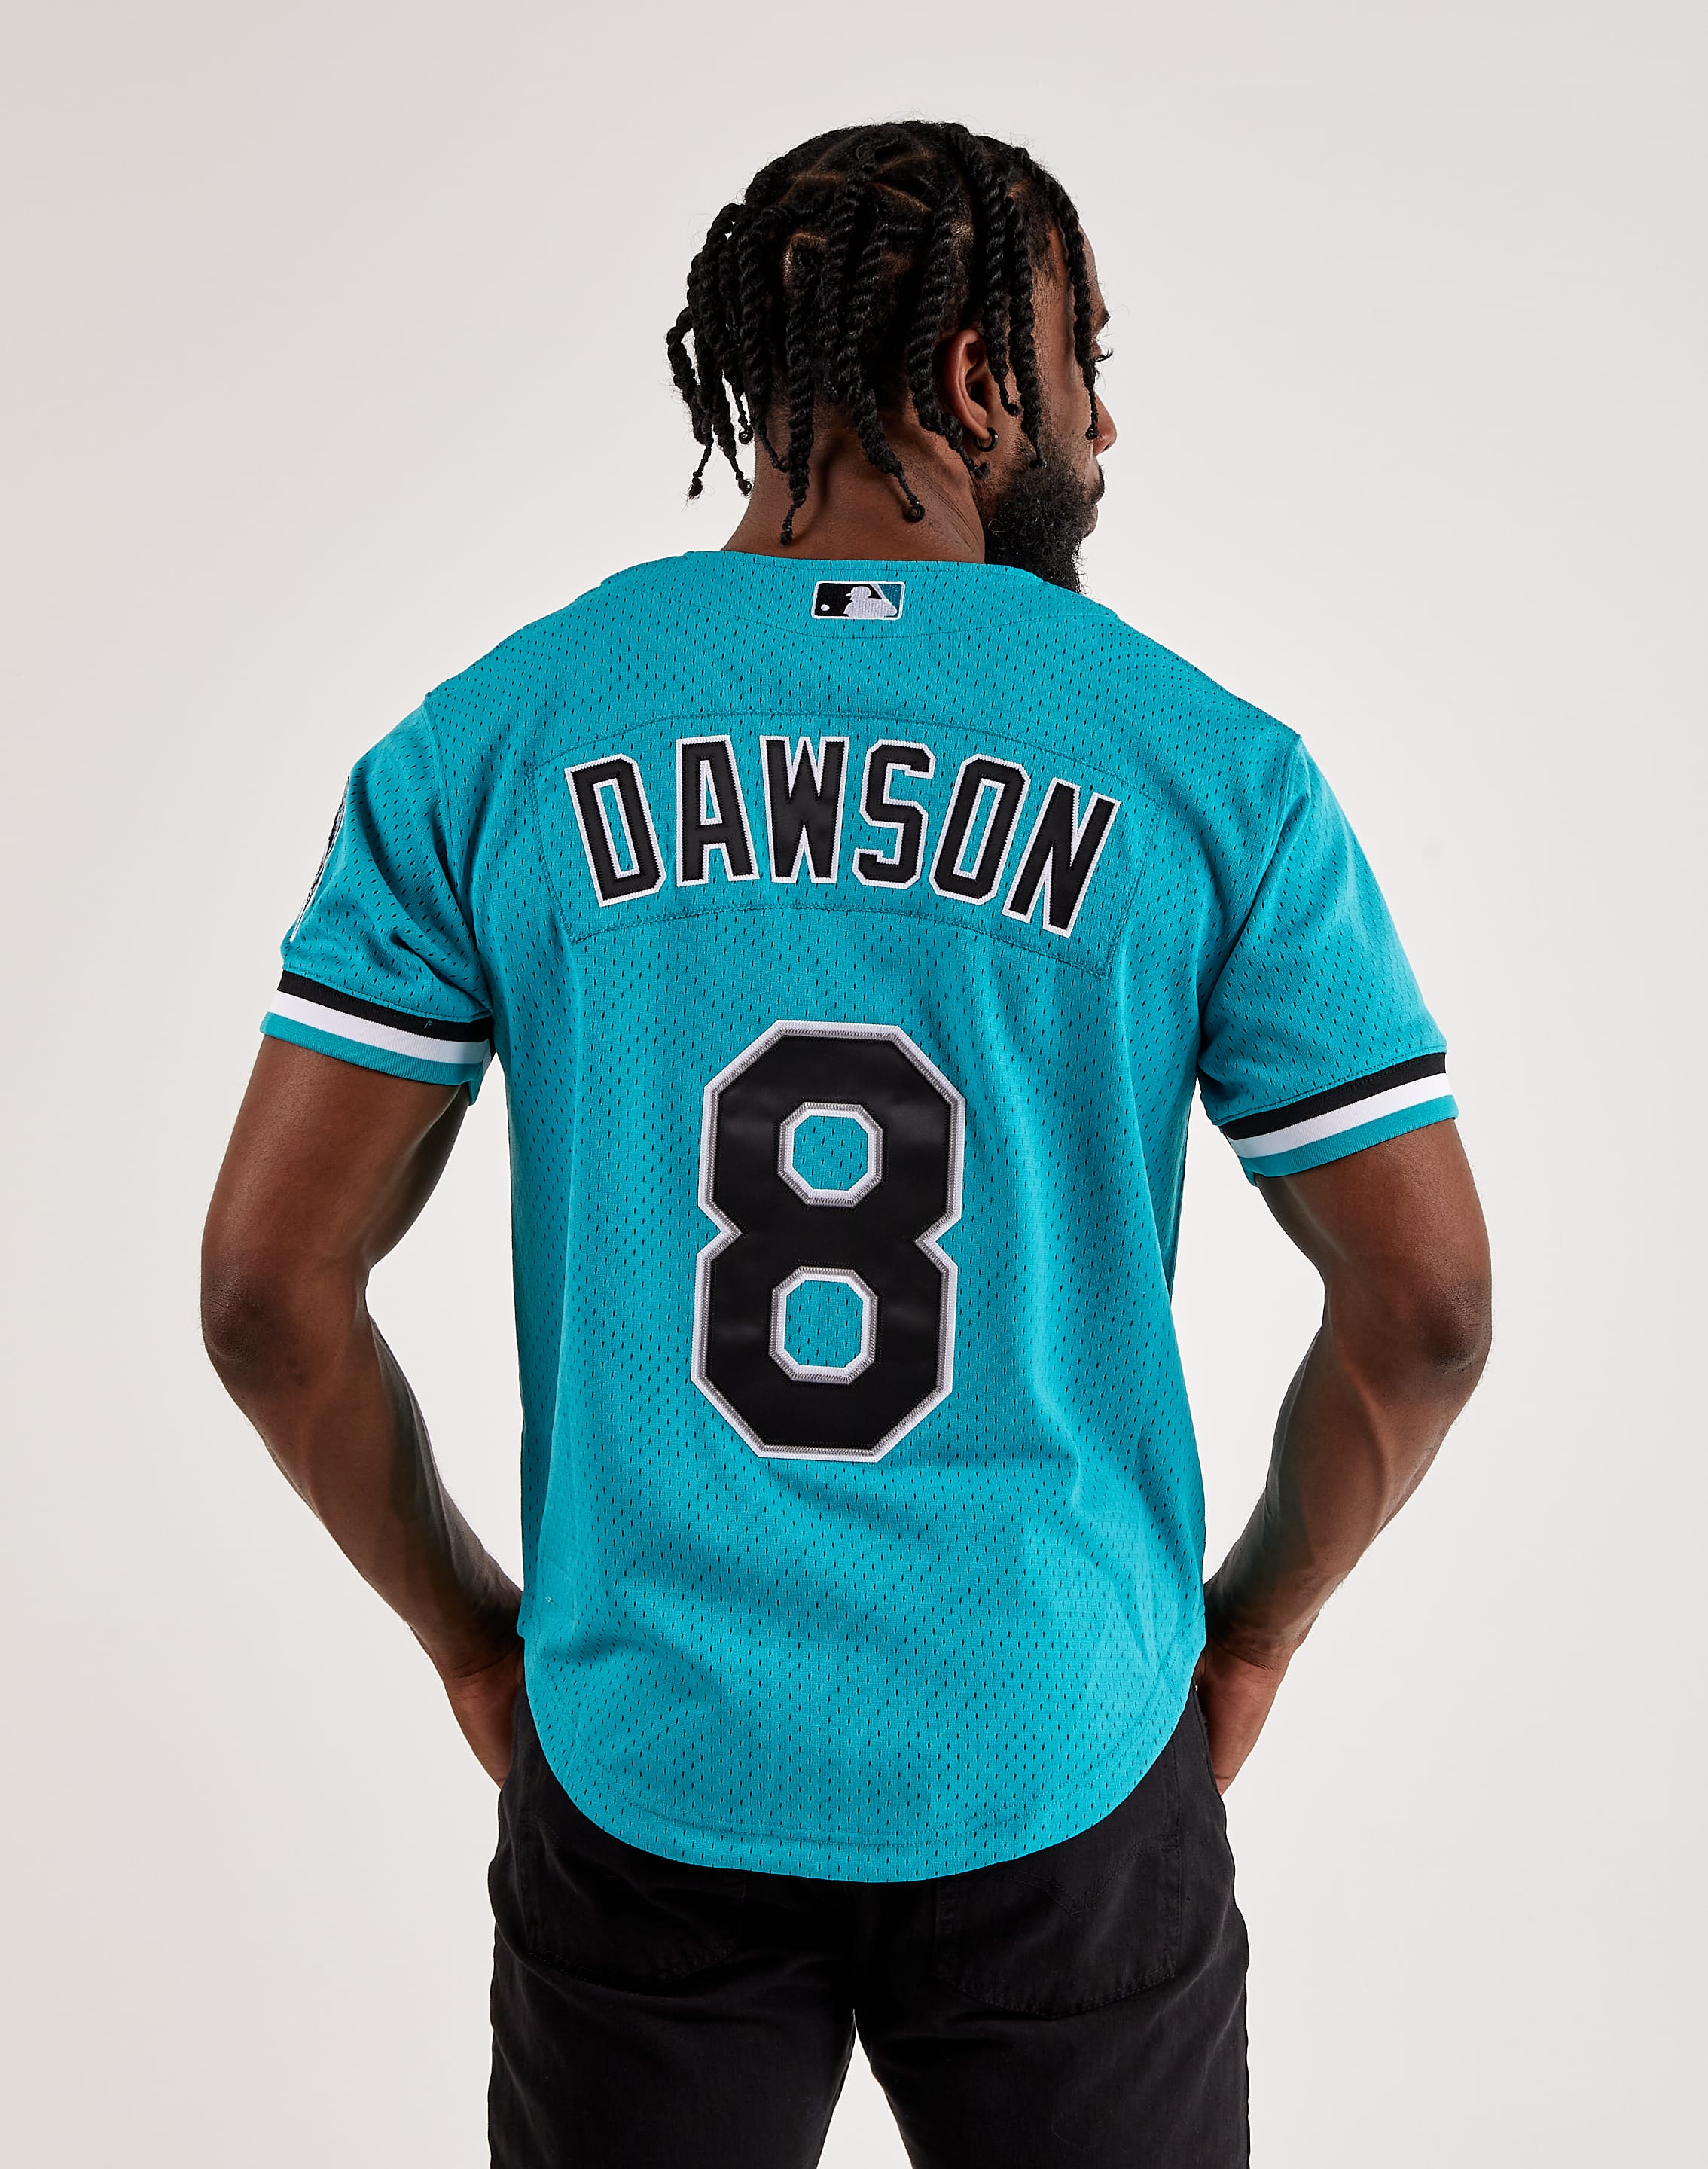 Authentic Florida Marlins Jerseys, Throwback Florida Marlins Jerseys &  Clearance Florida Marlins Jerseys